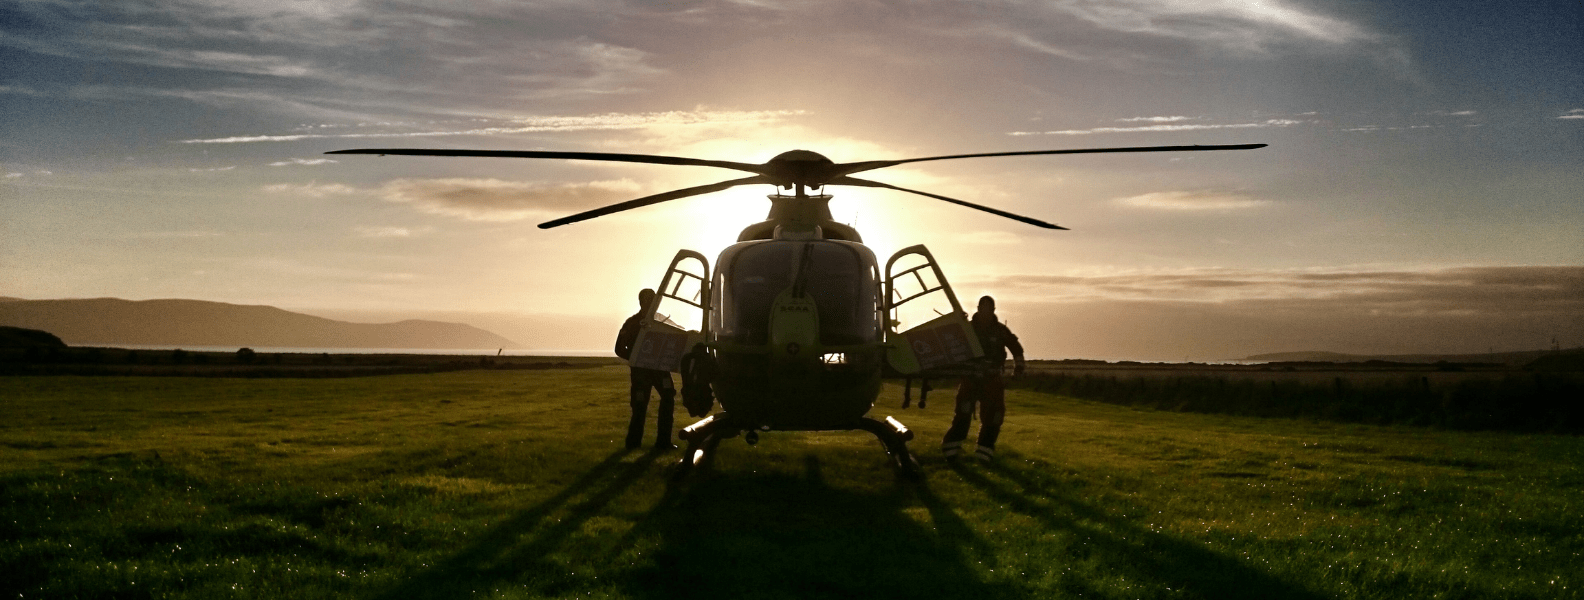 Helicopter at dusk with crew